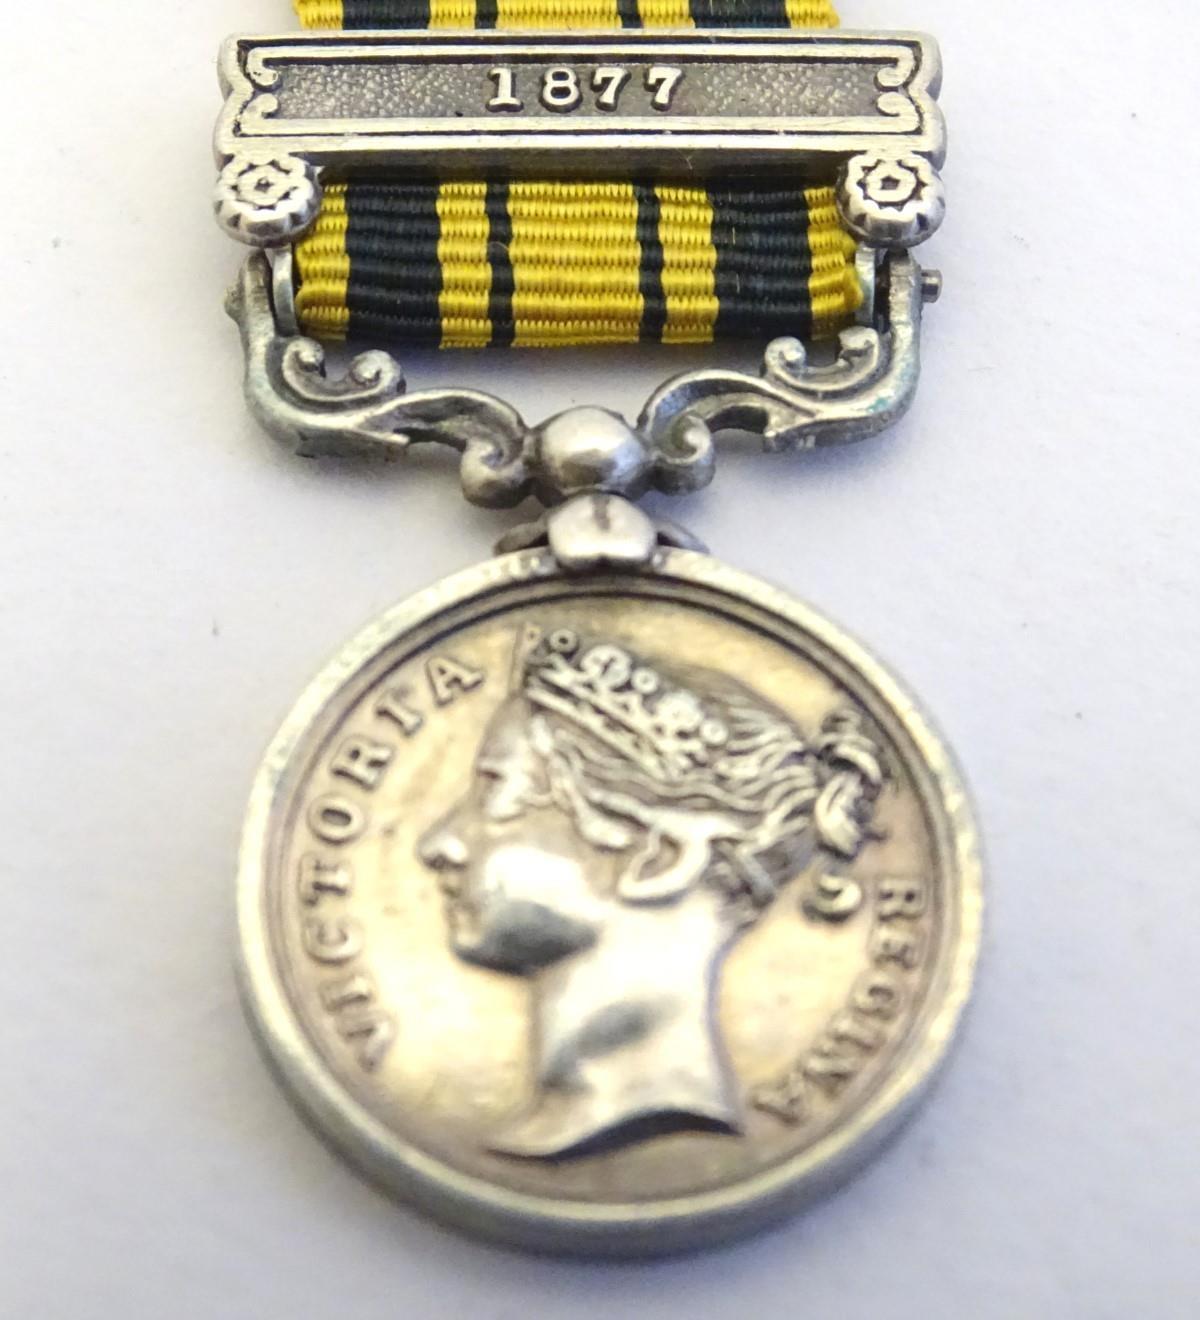 Militaria: a Victorian miniature South Africa Medal, with 1877 bar, 2" long (including ribbon.) - Image 2 of 8